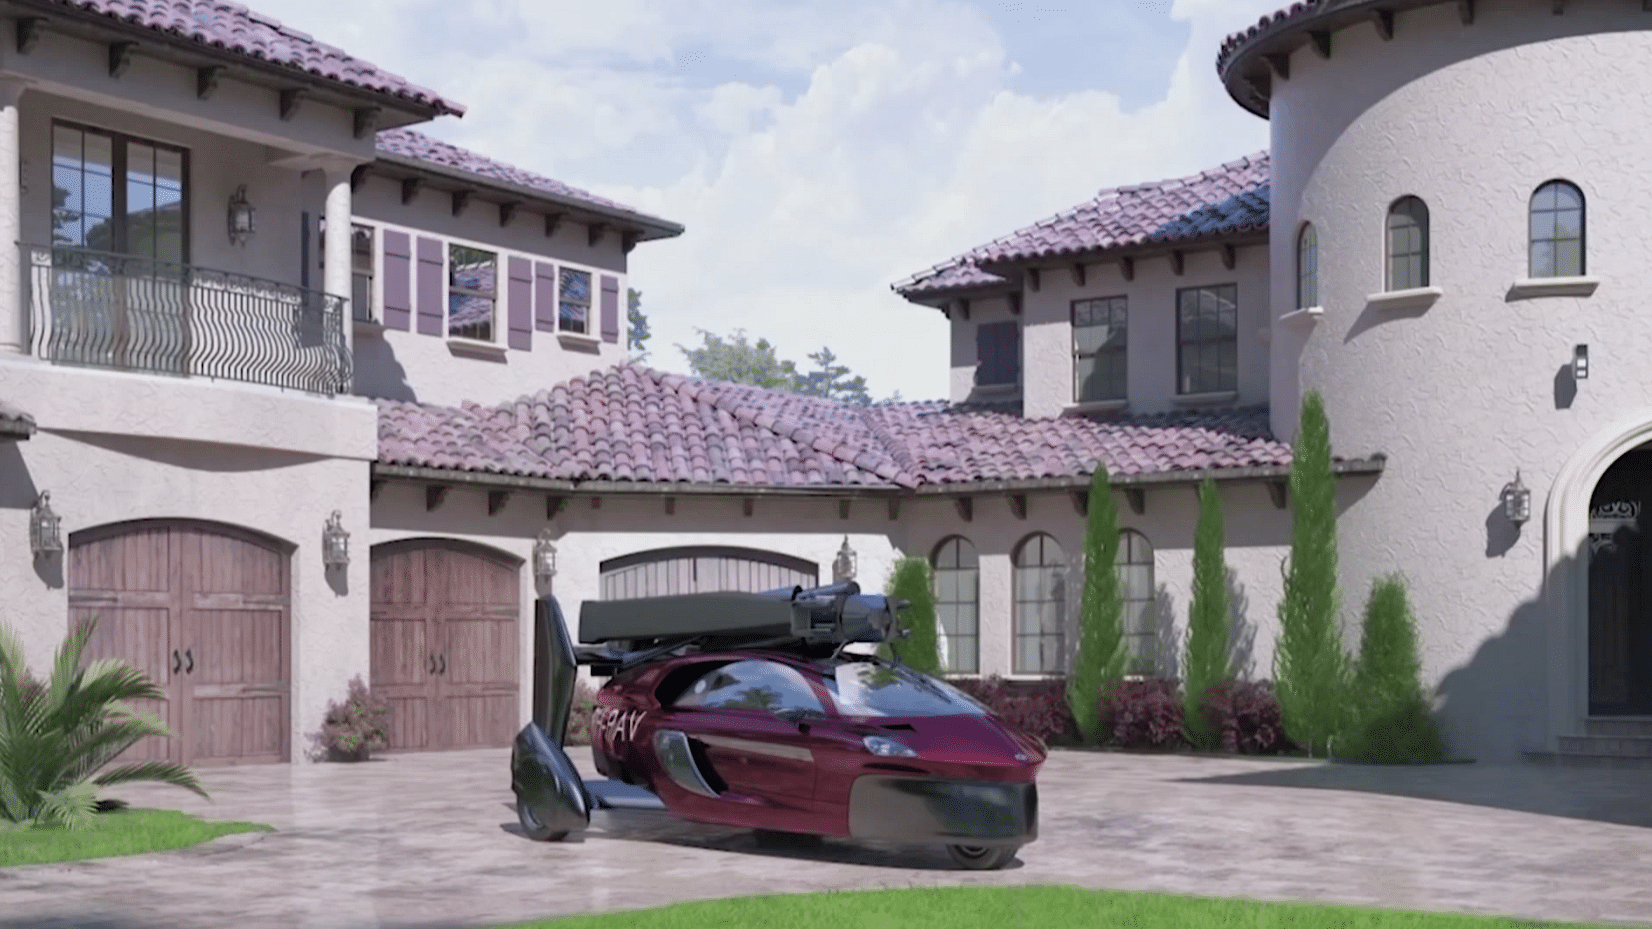 PAL-V, the car that can fly, parked outside a house.